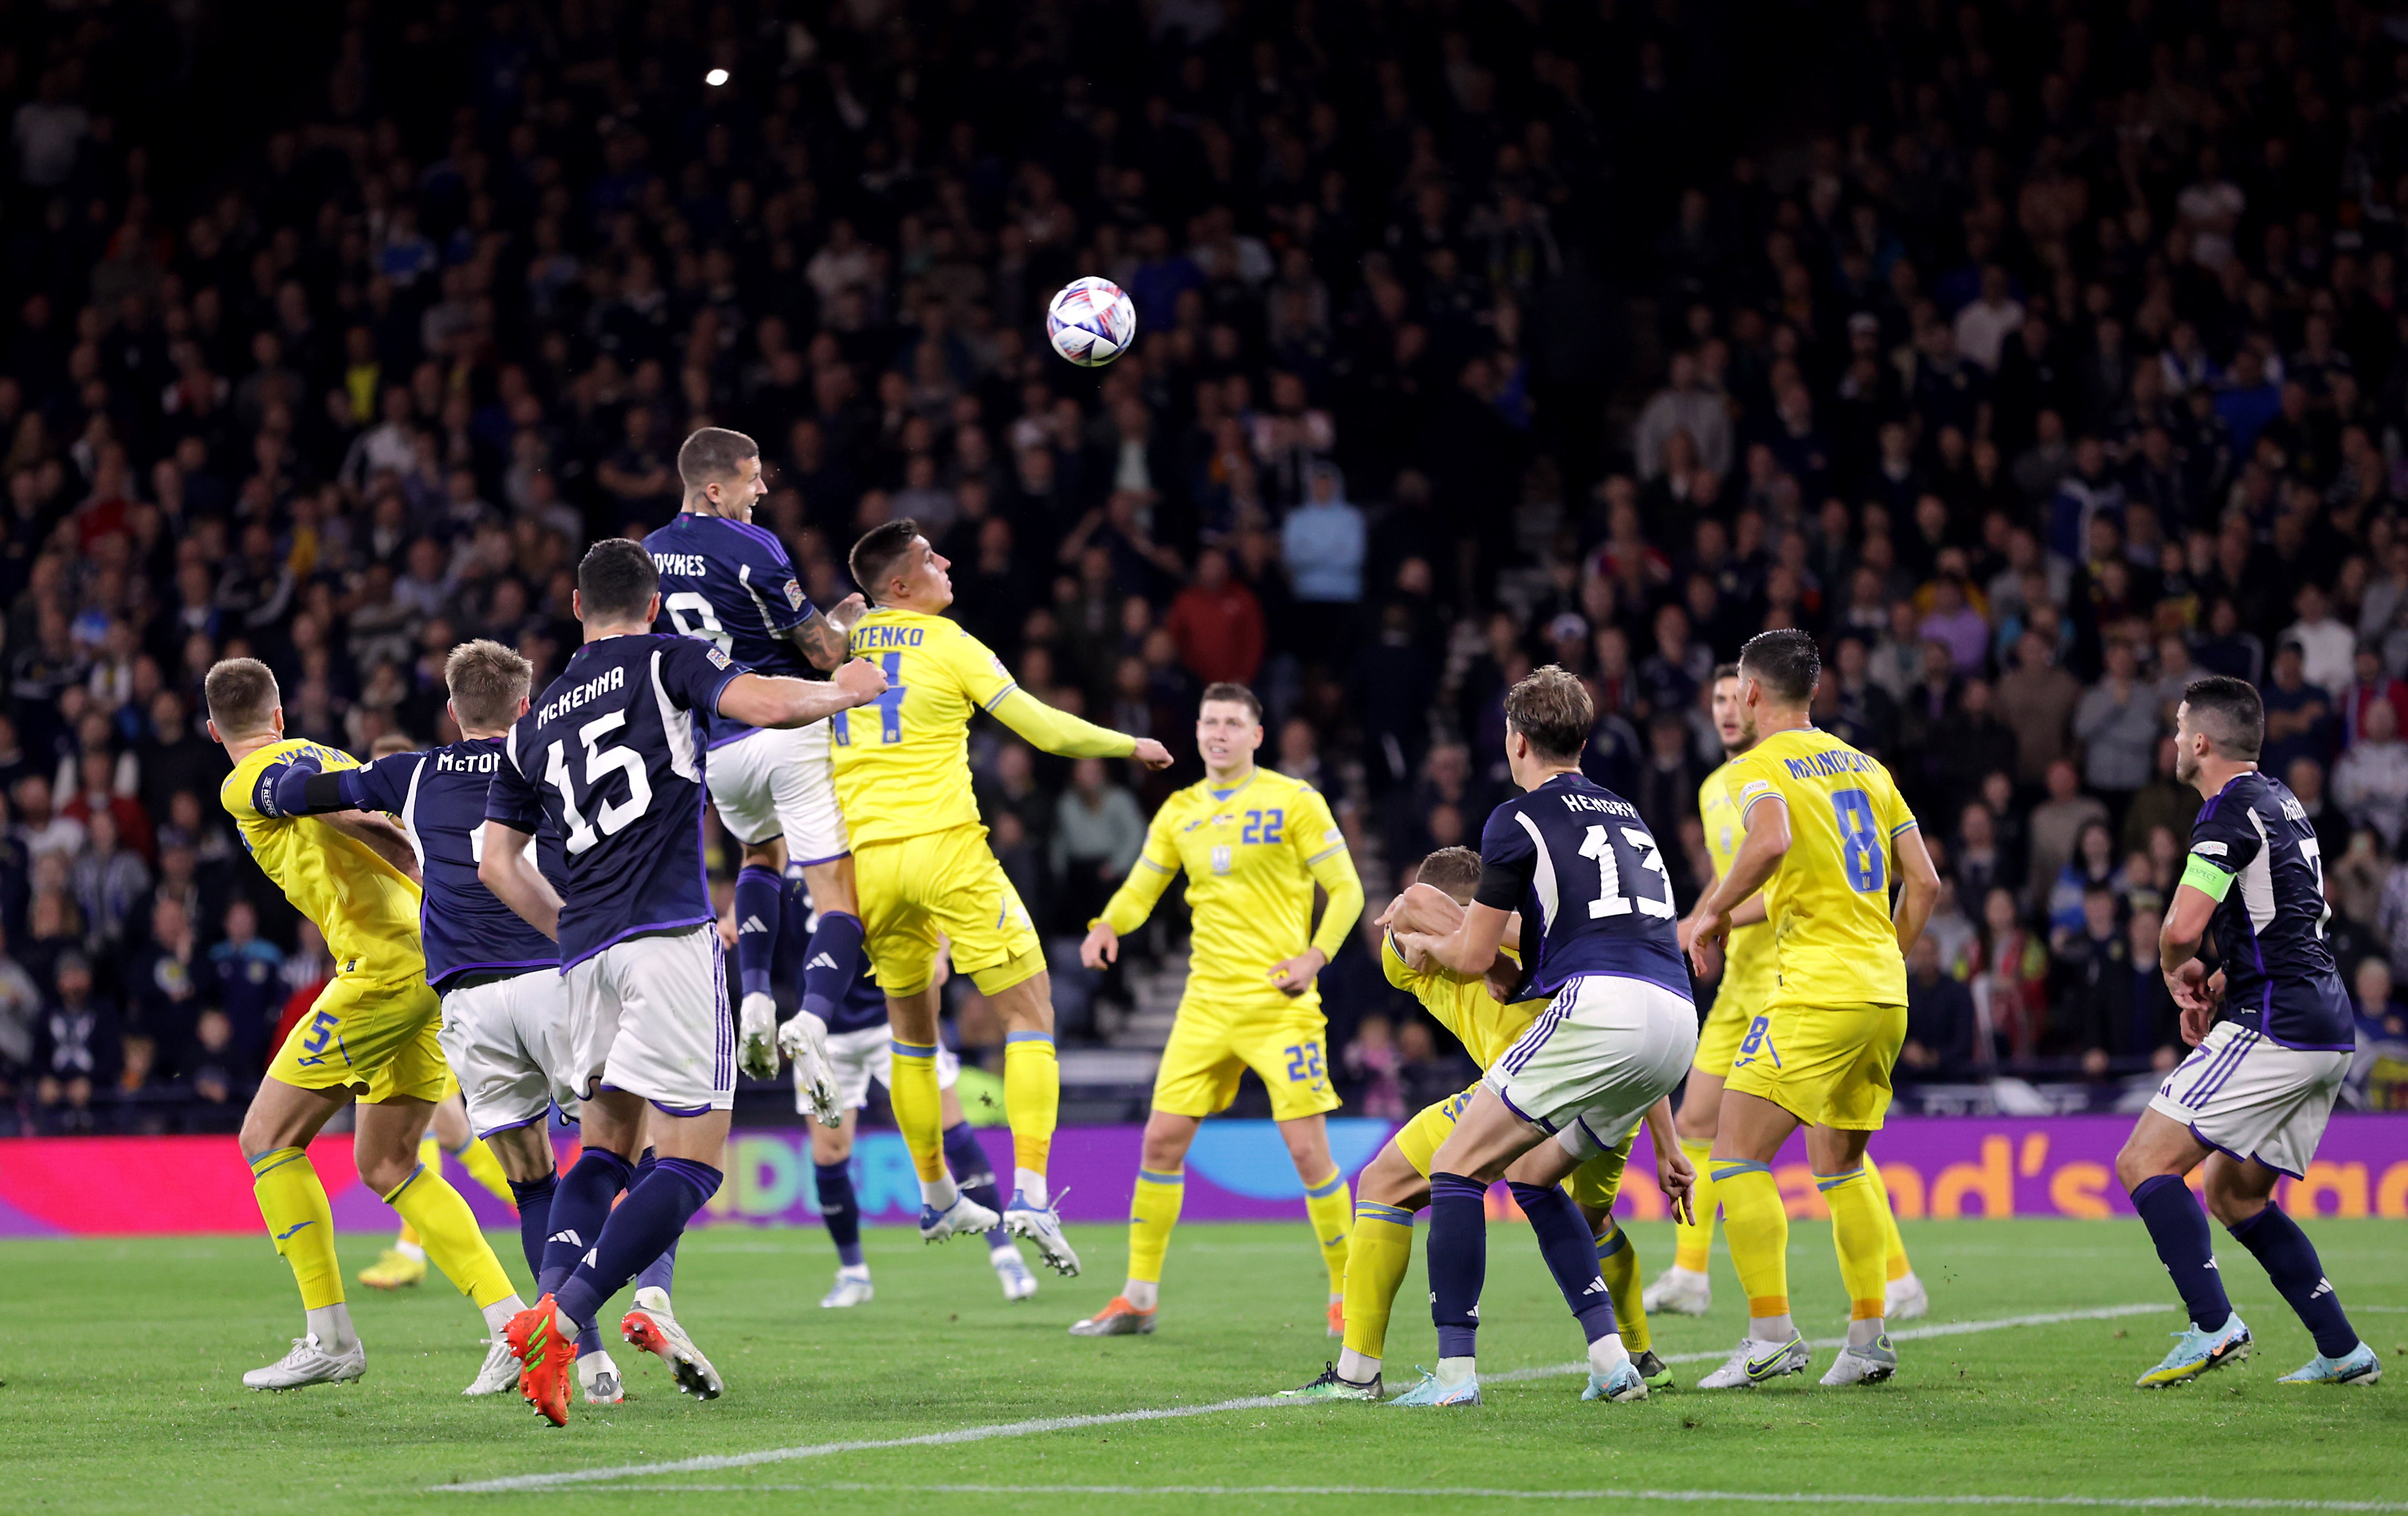 Scotland take on Ukraine in the Nations League